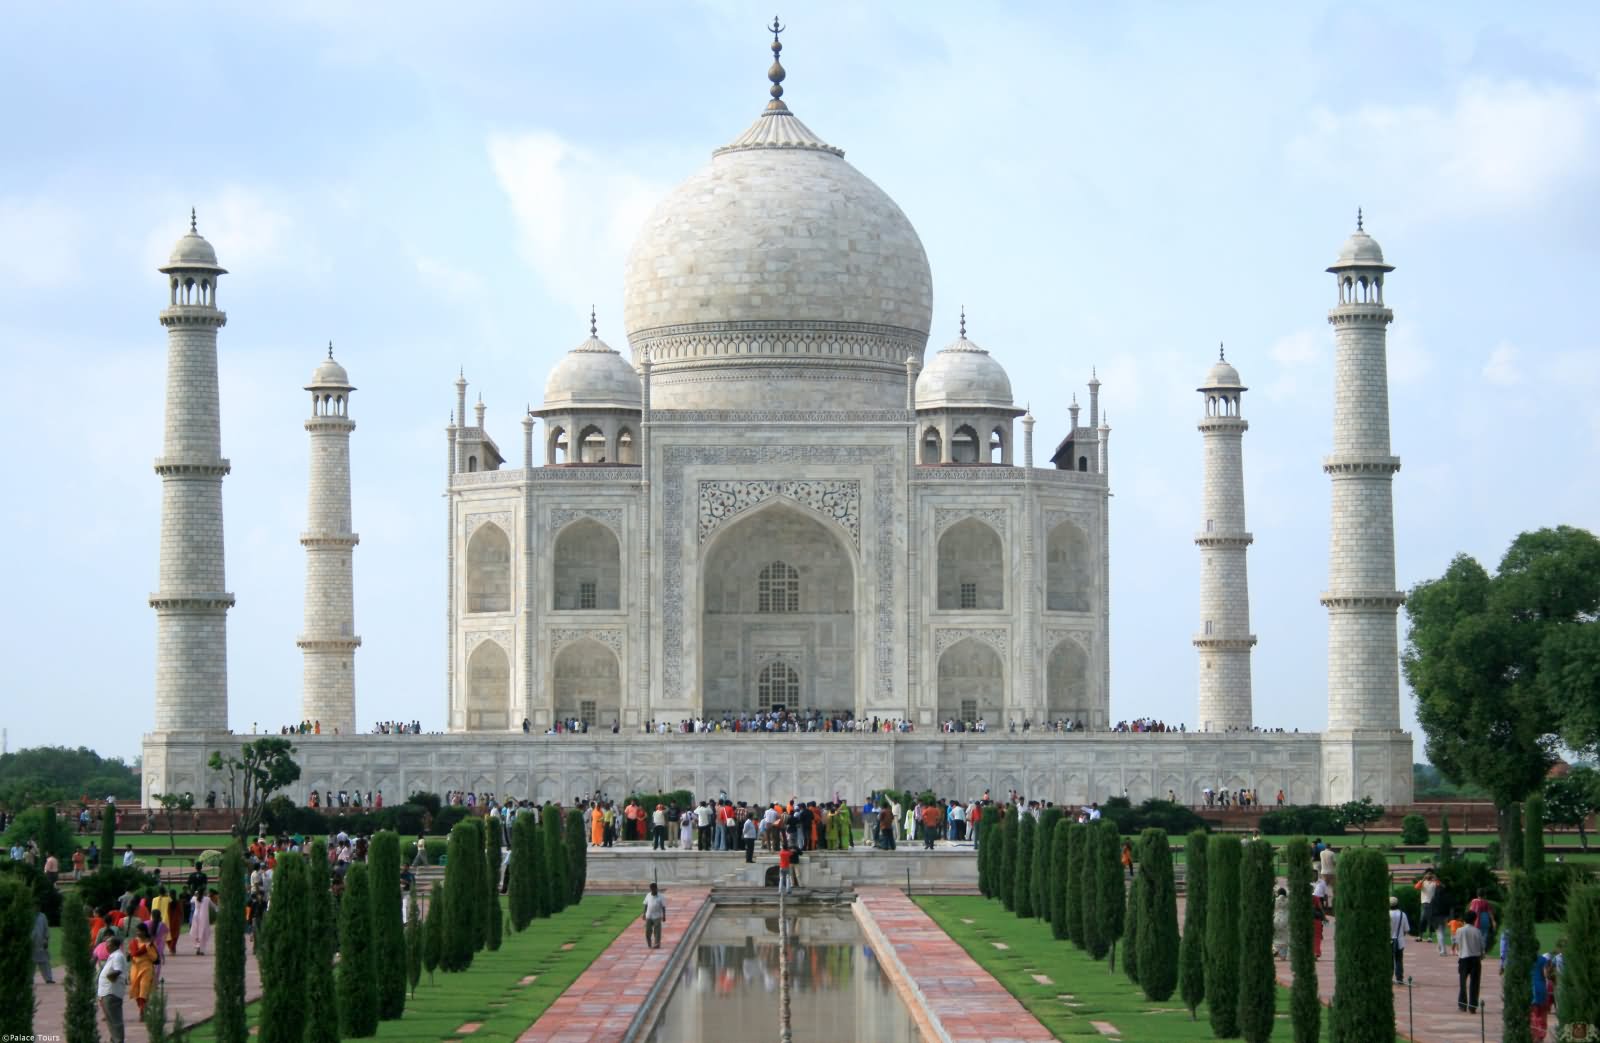 Large Number Of People Gathered To Watch Taj Mahal